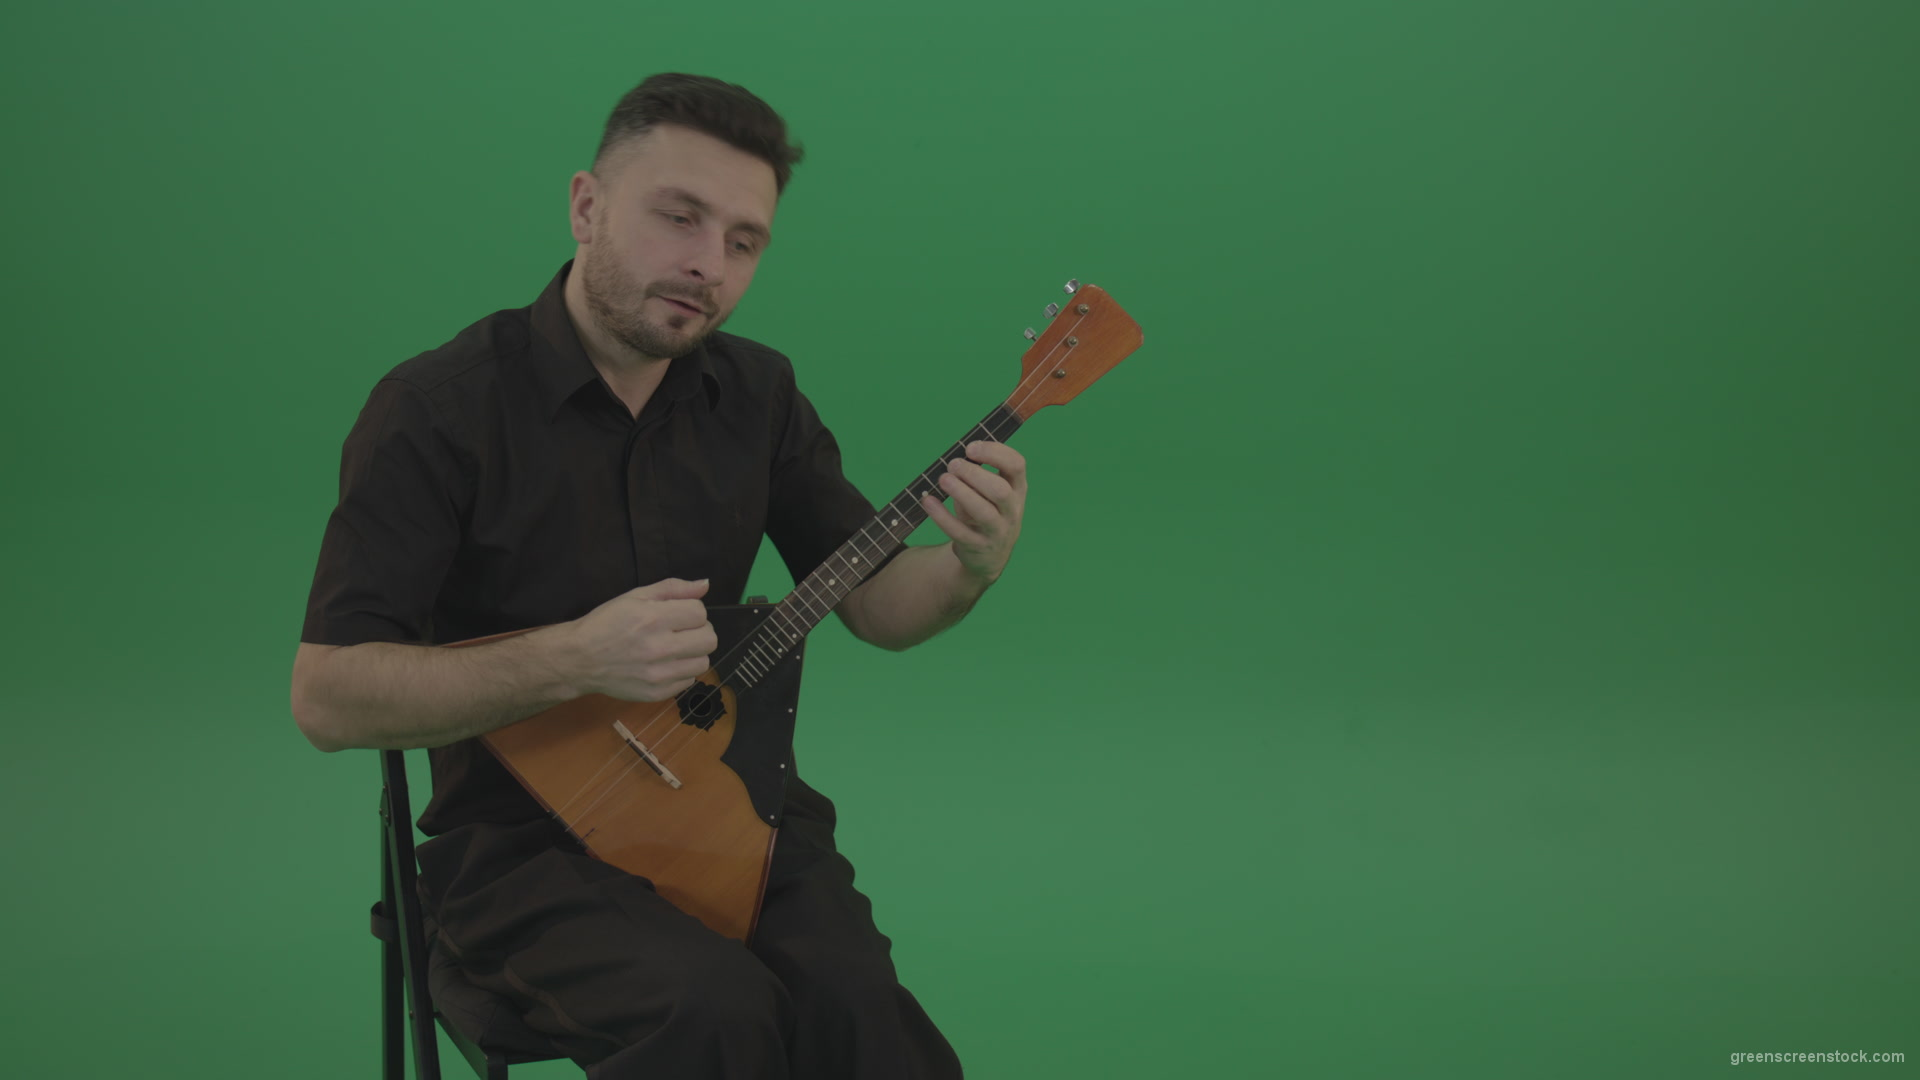 Funny-Balalaika-music-player-in-black-wear-playing-in-wedding-isolated-on-green-screen-background_005 Green Screen Stock